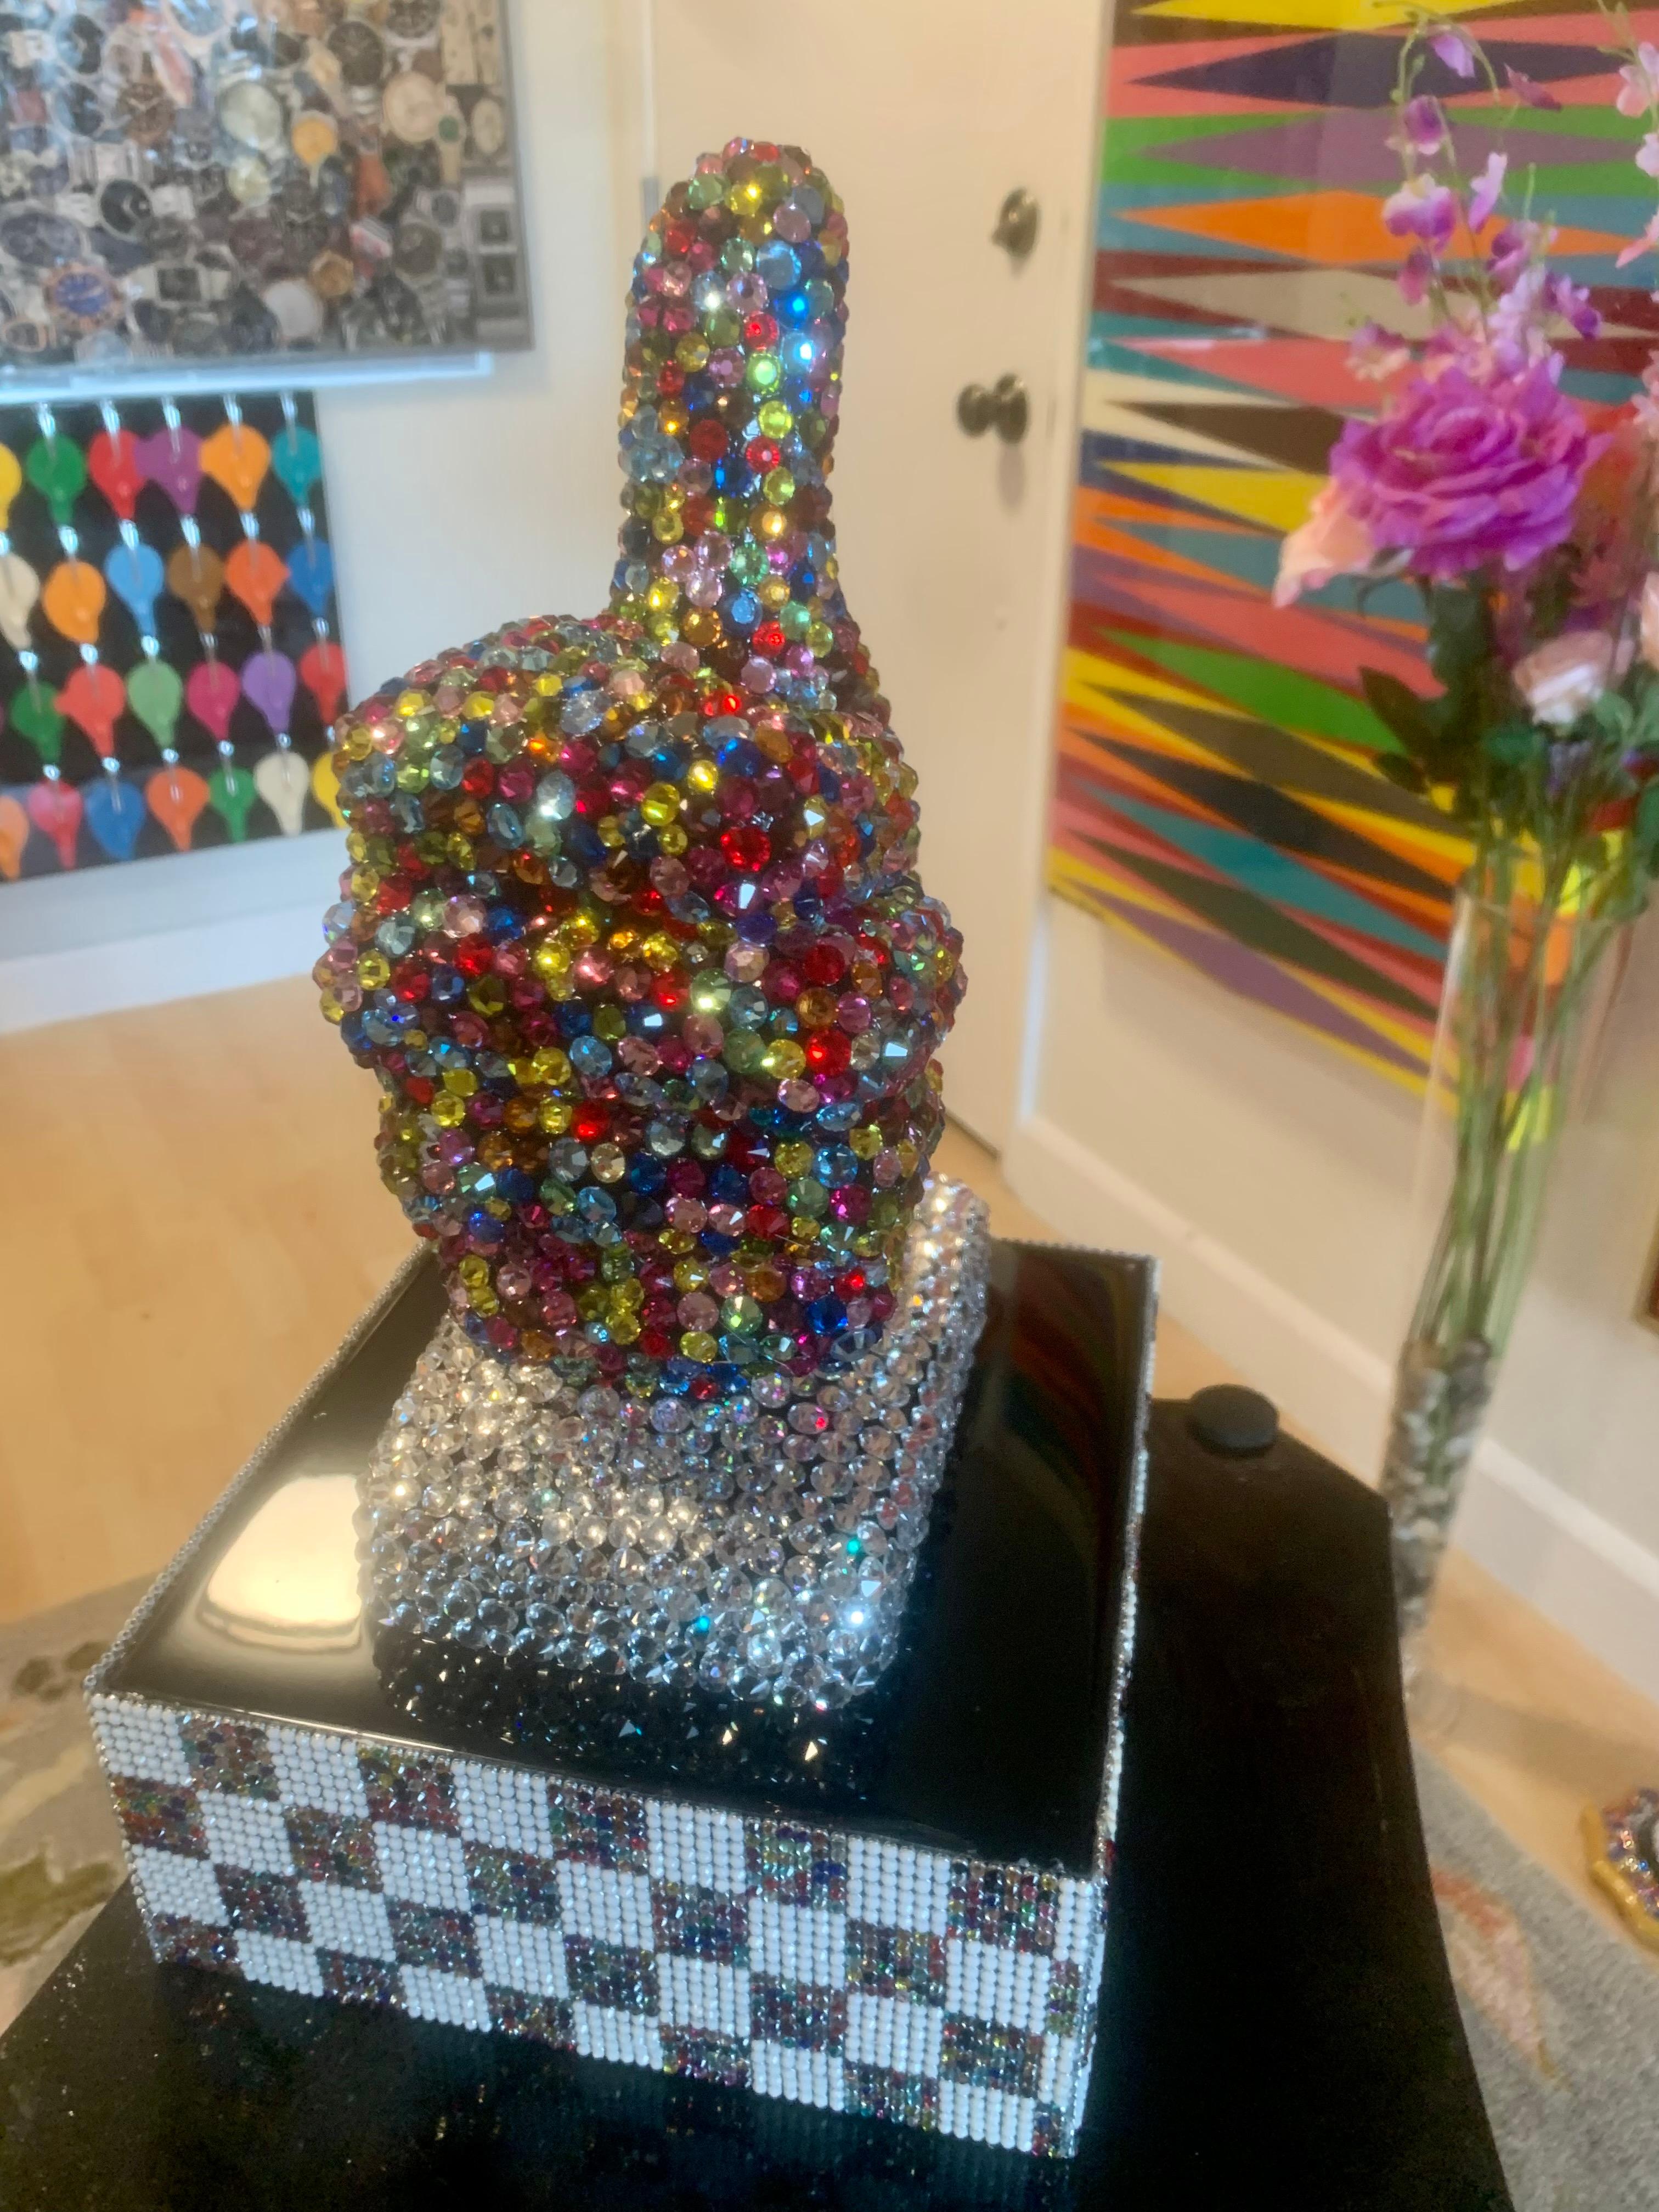 THUMBS UP FOR LIFE (One of a Kind Swarovski Mixed Media Sculpture) 3